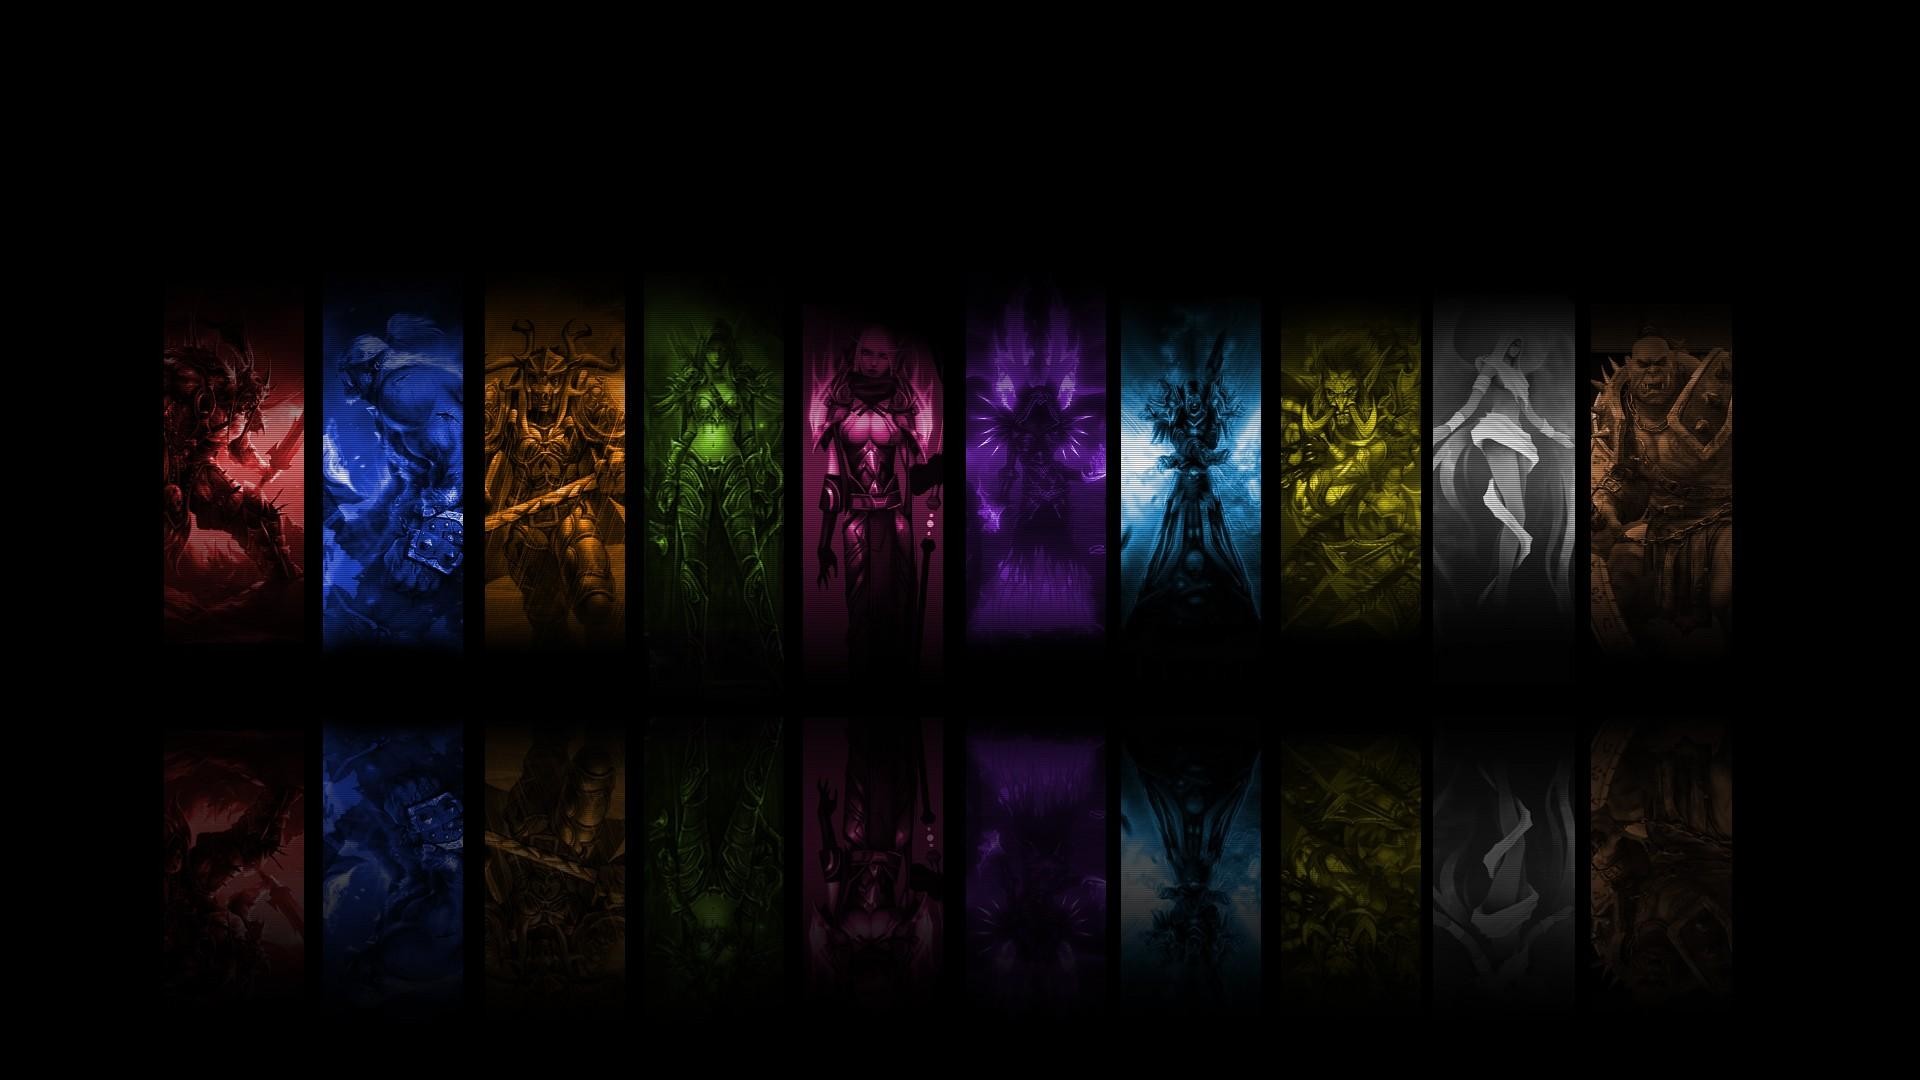 World Of Warcraft Druid Wallpapers Gallery At Freakygaming .